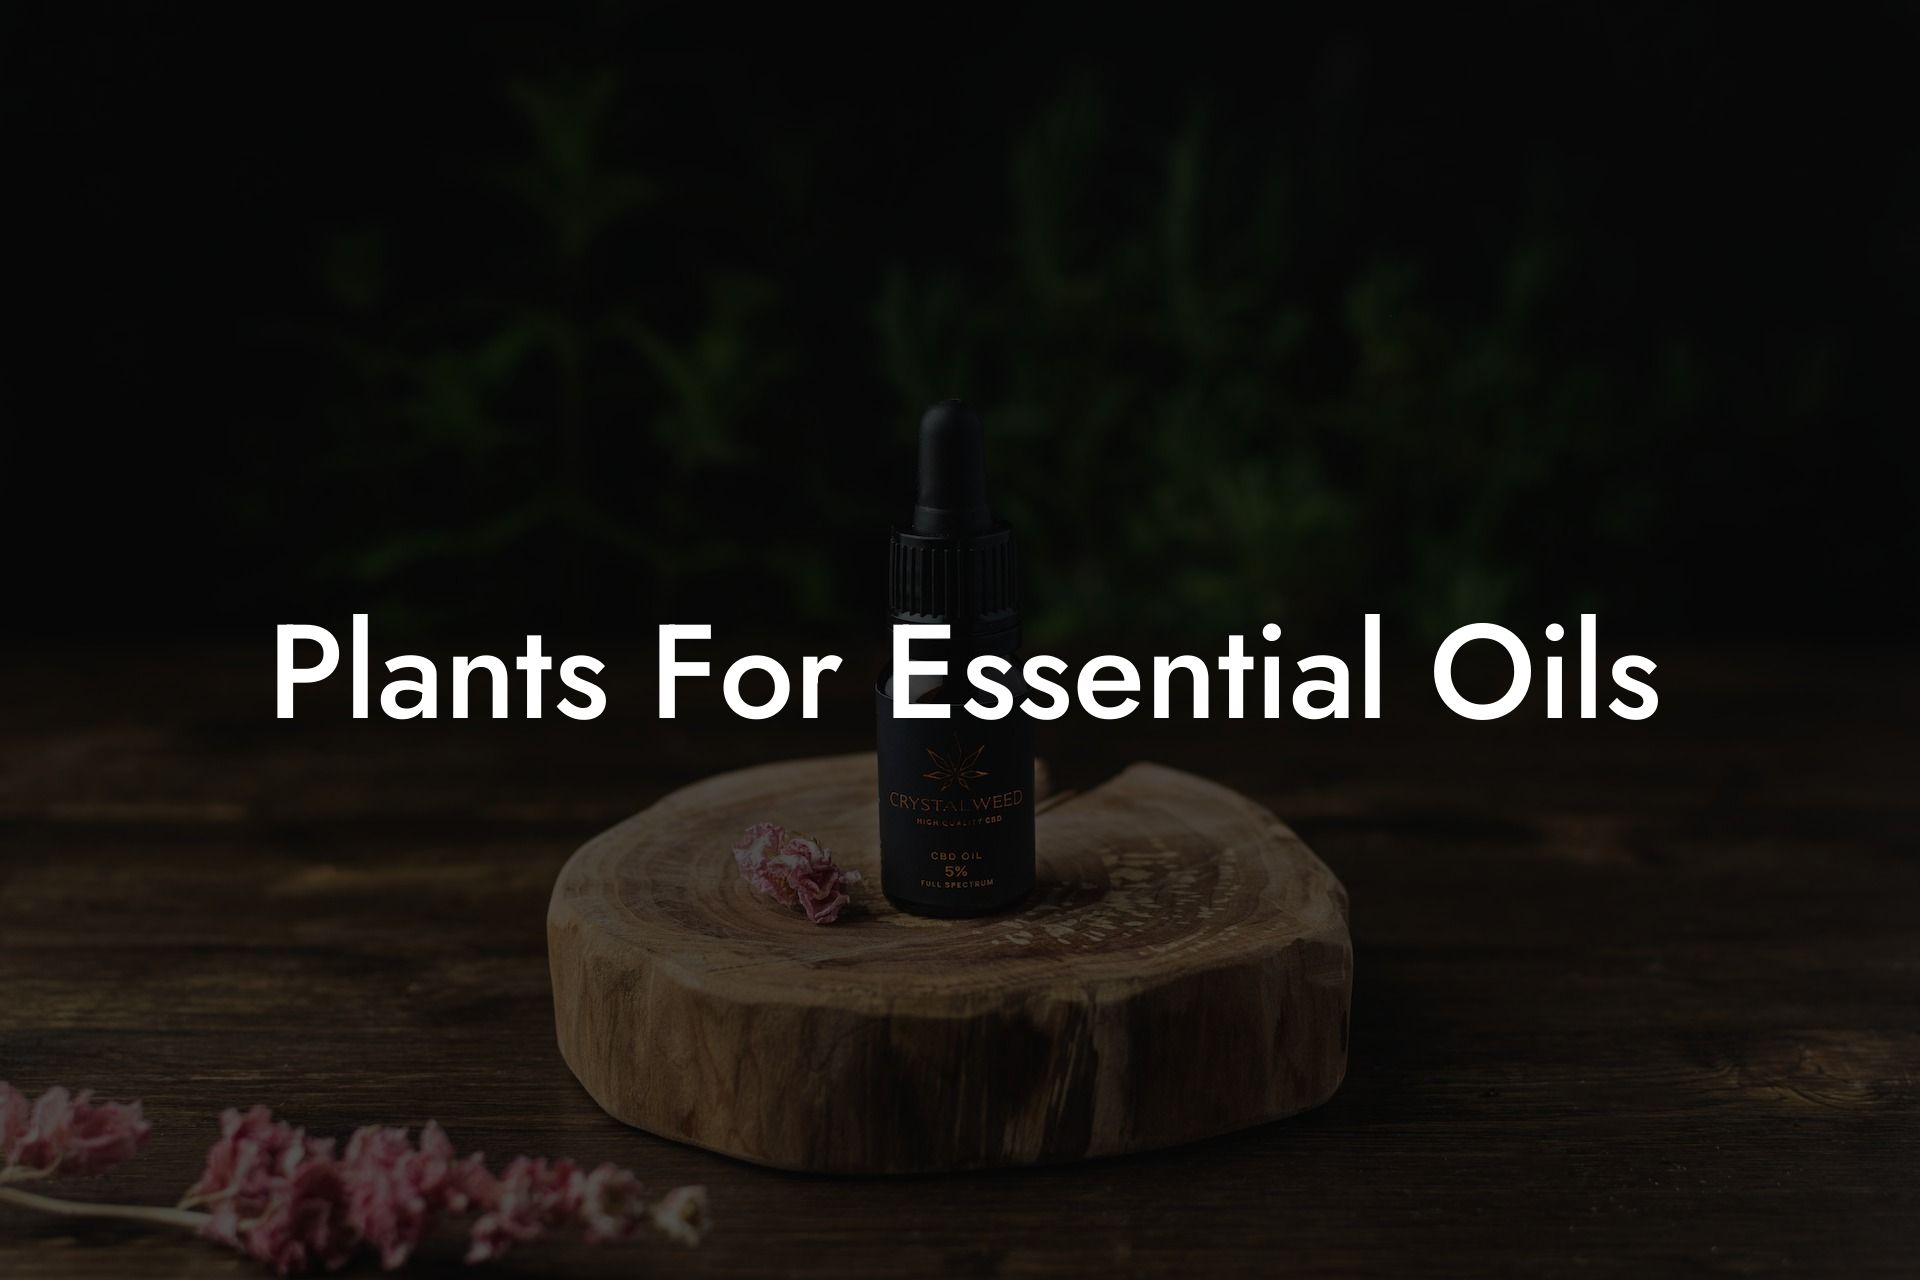 Plants For Essential Oils